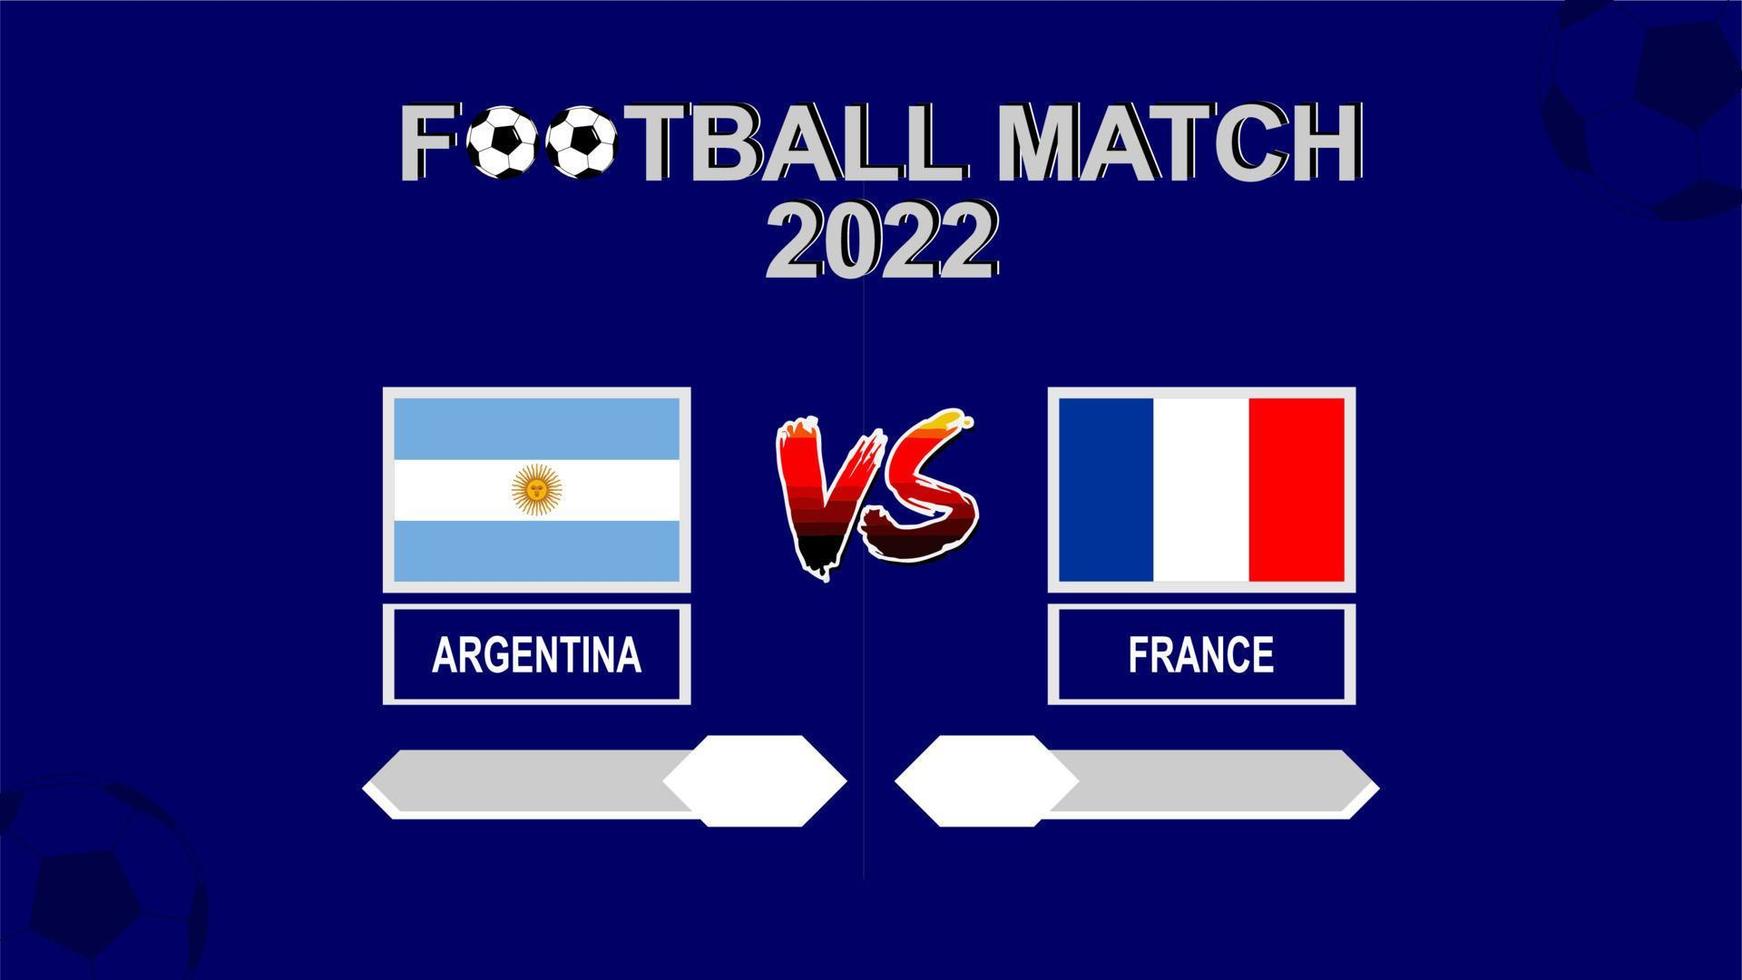 Argentina vs France football cup 2022 blue template background vector for schedule or result match